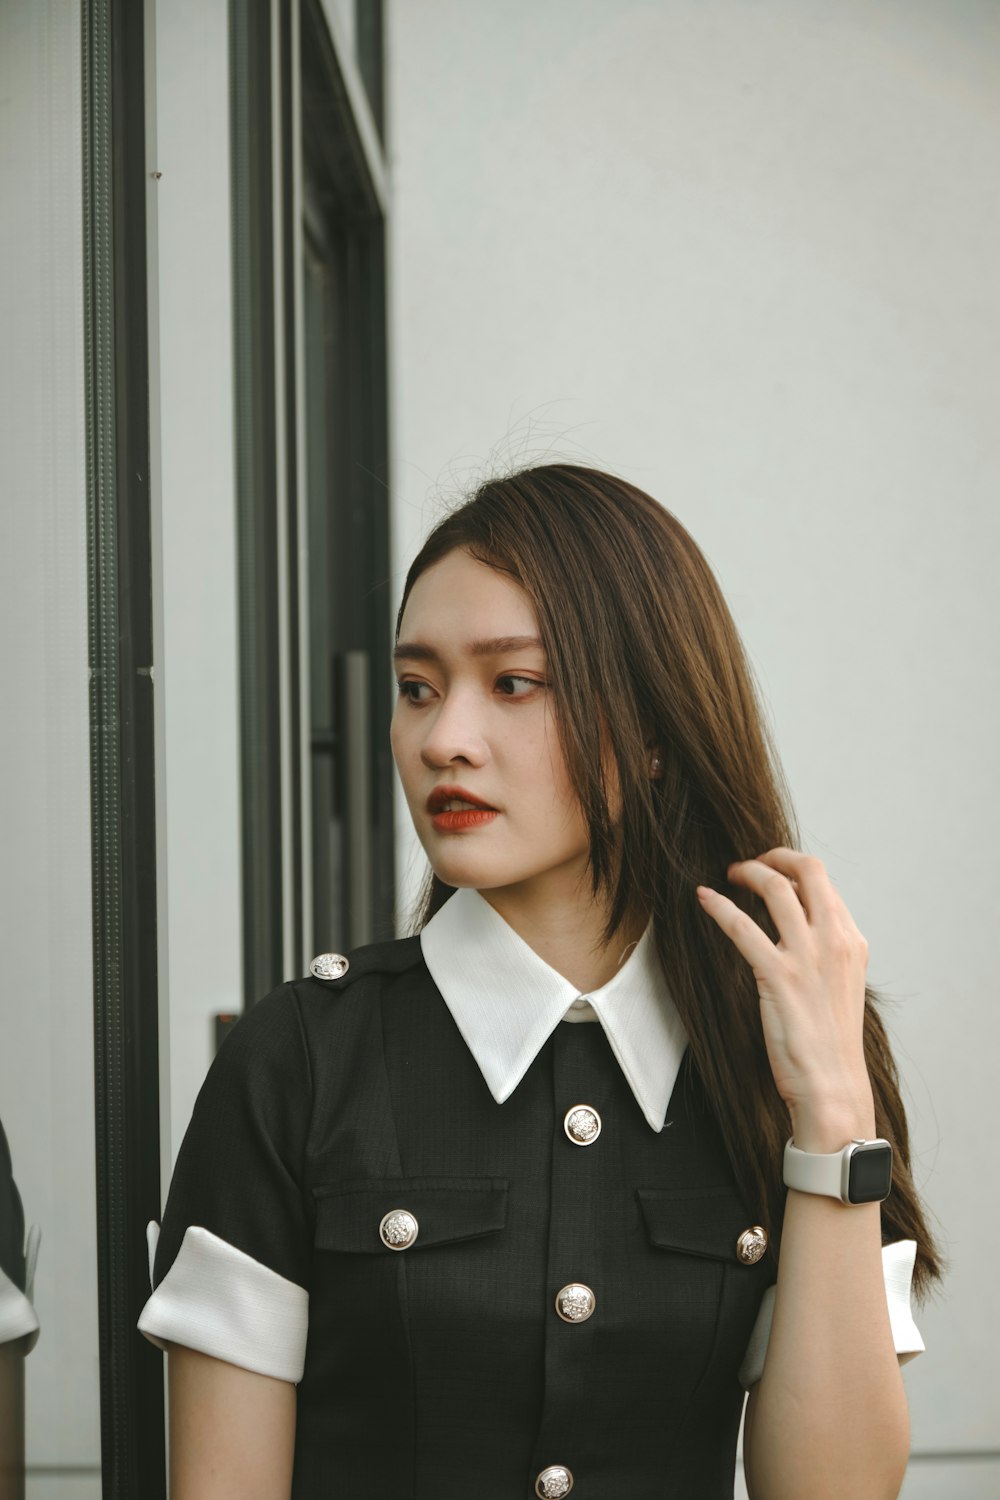 a woman with long hair wearing a uniform